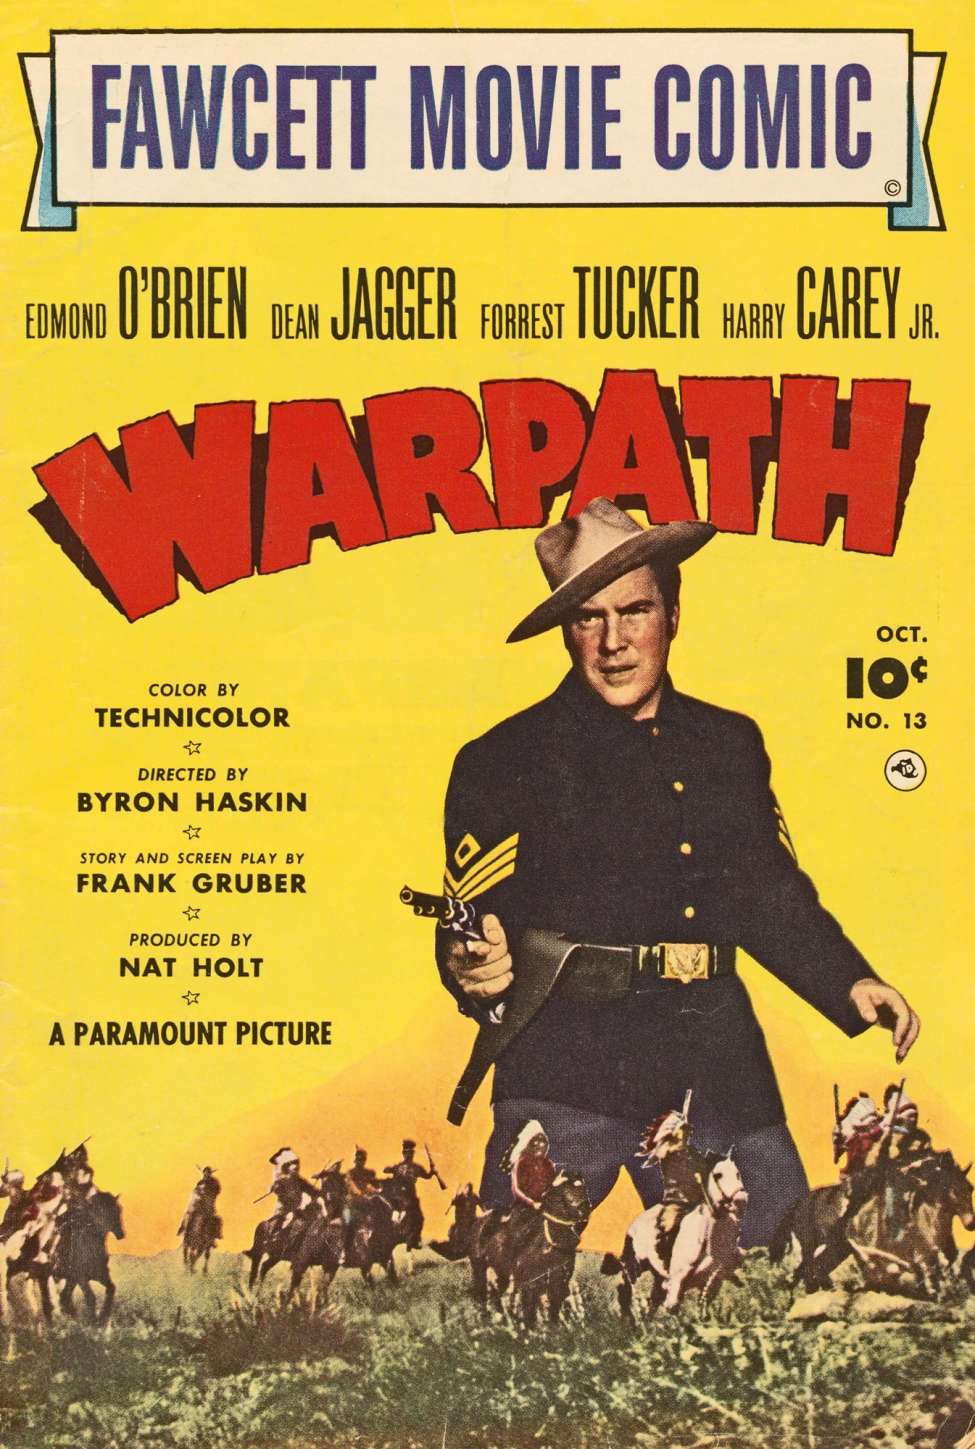 Book Cover For Fawcett Movie Comic 13 - Warpath